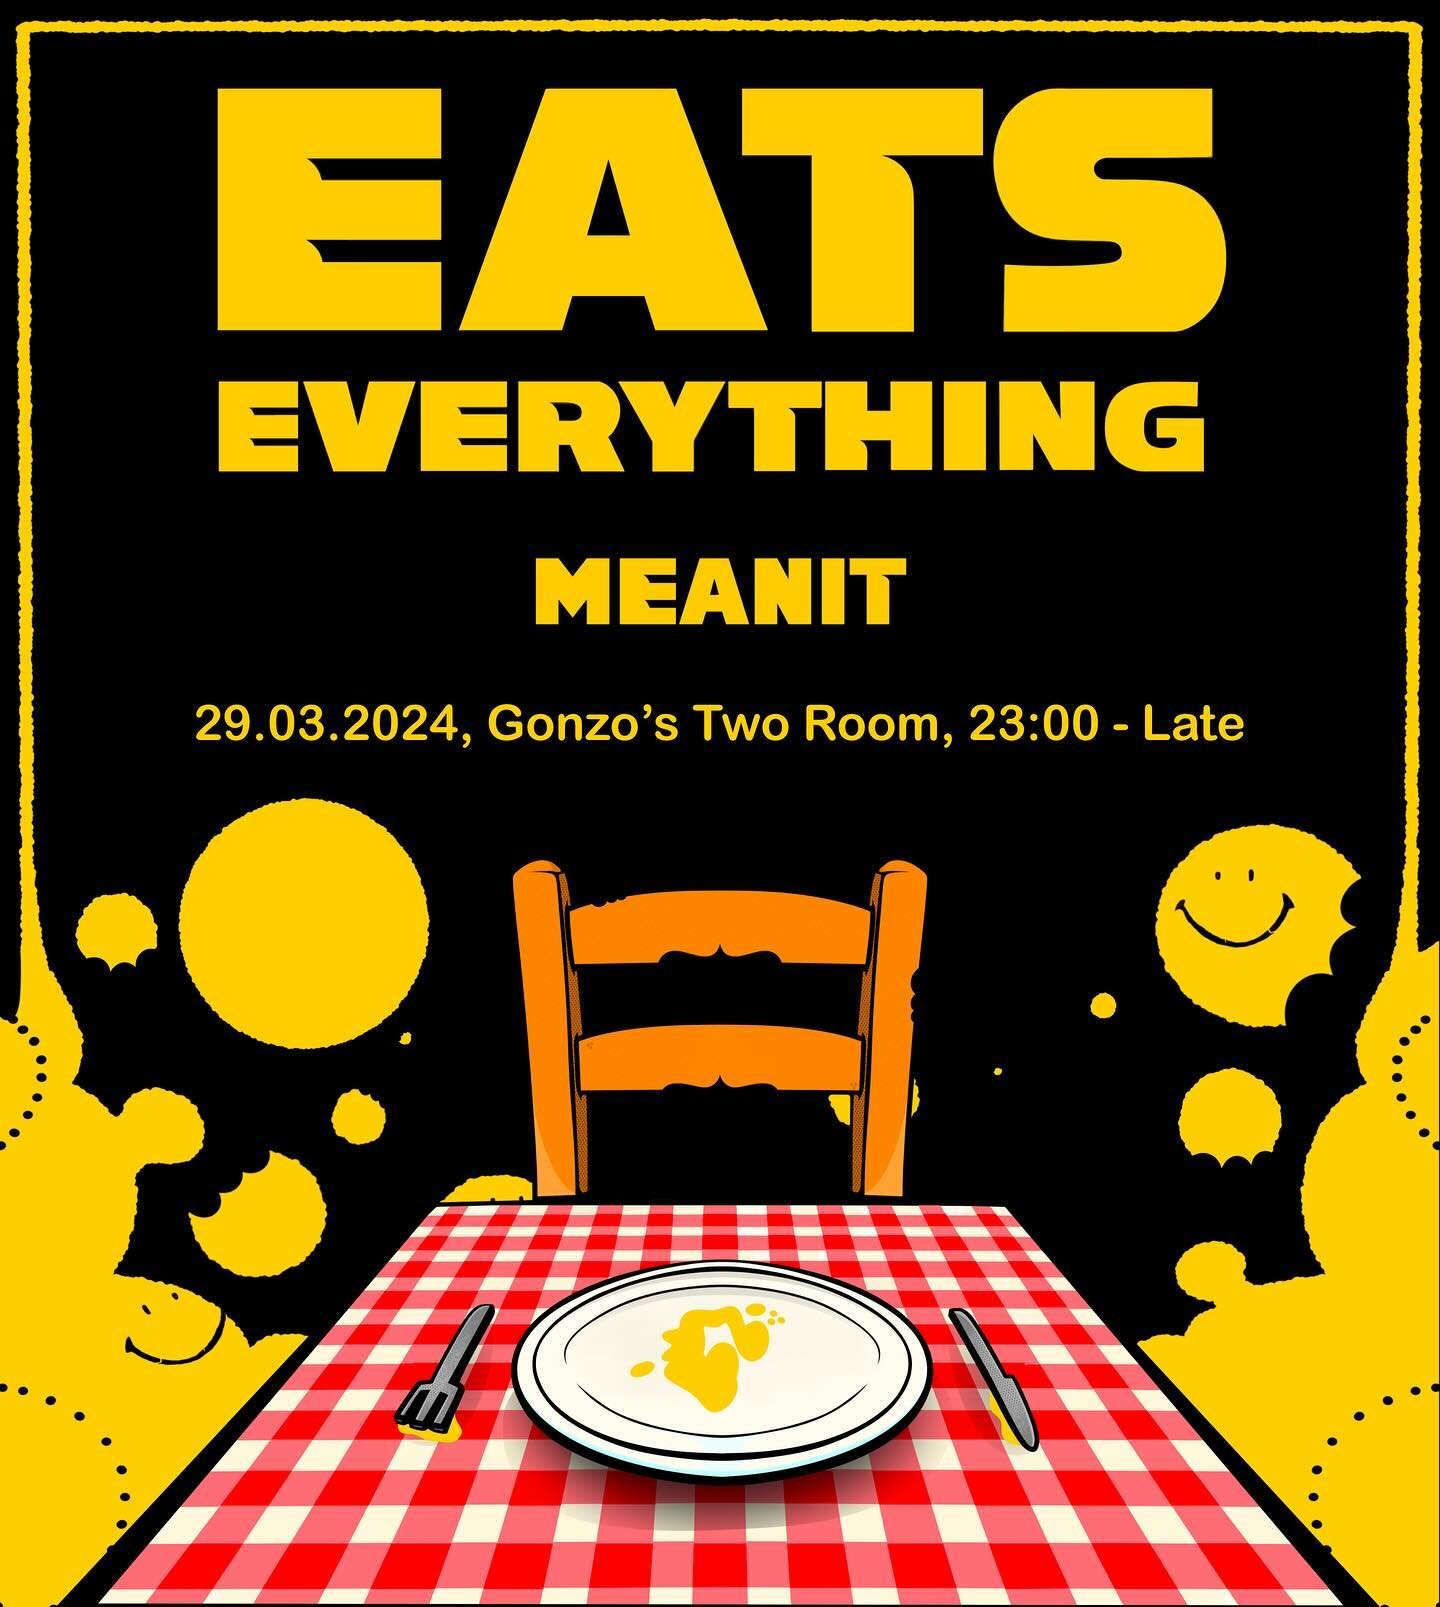 This one&rsquo;s been a long time coming, the don that is Eats Everything will be joining us for an intimate one off set. 

A contemporary UK electronic music institution, Eats Everything (AKA Daniel Pearce) has a global reputation built on versatili